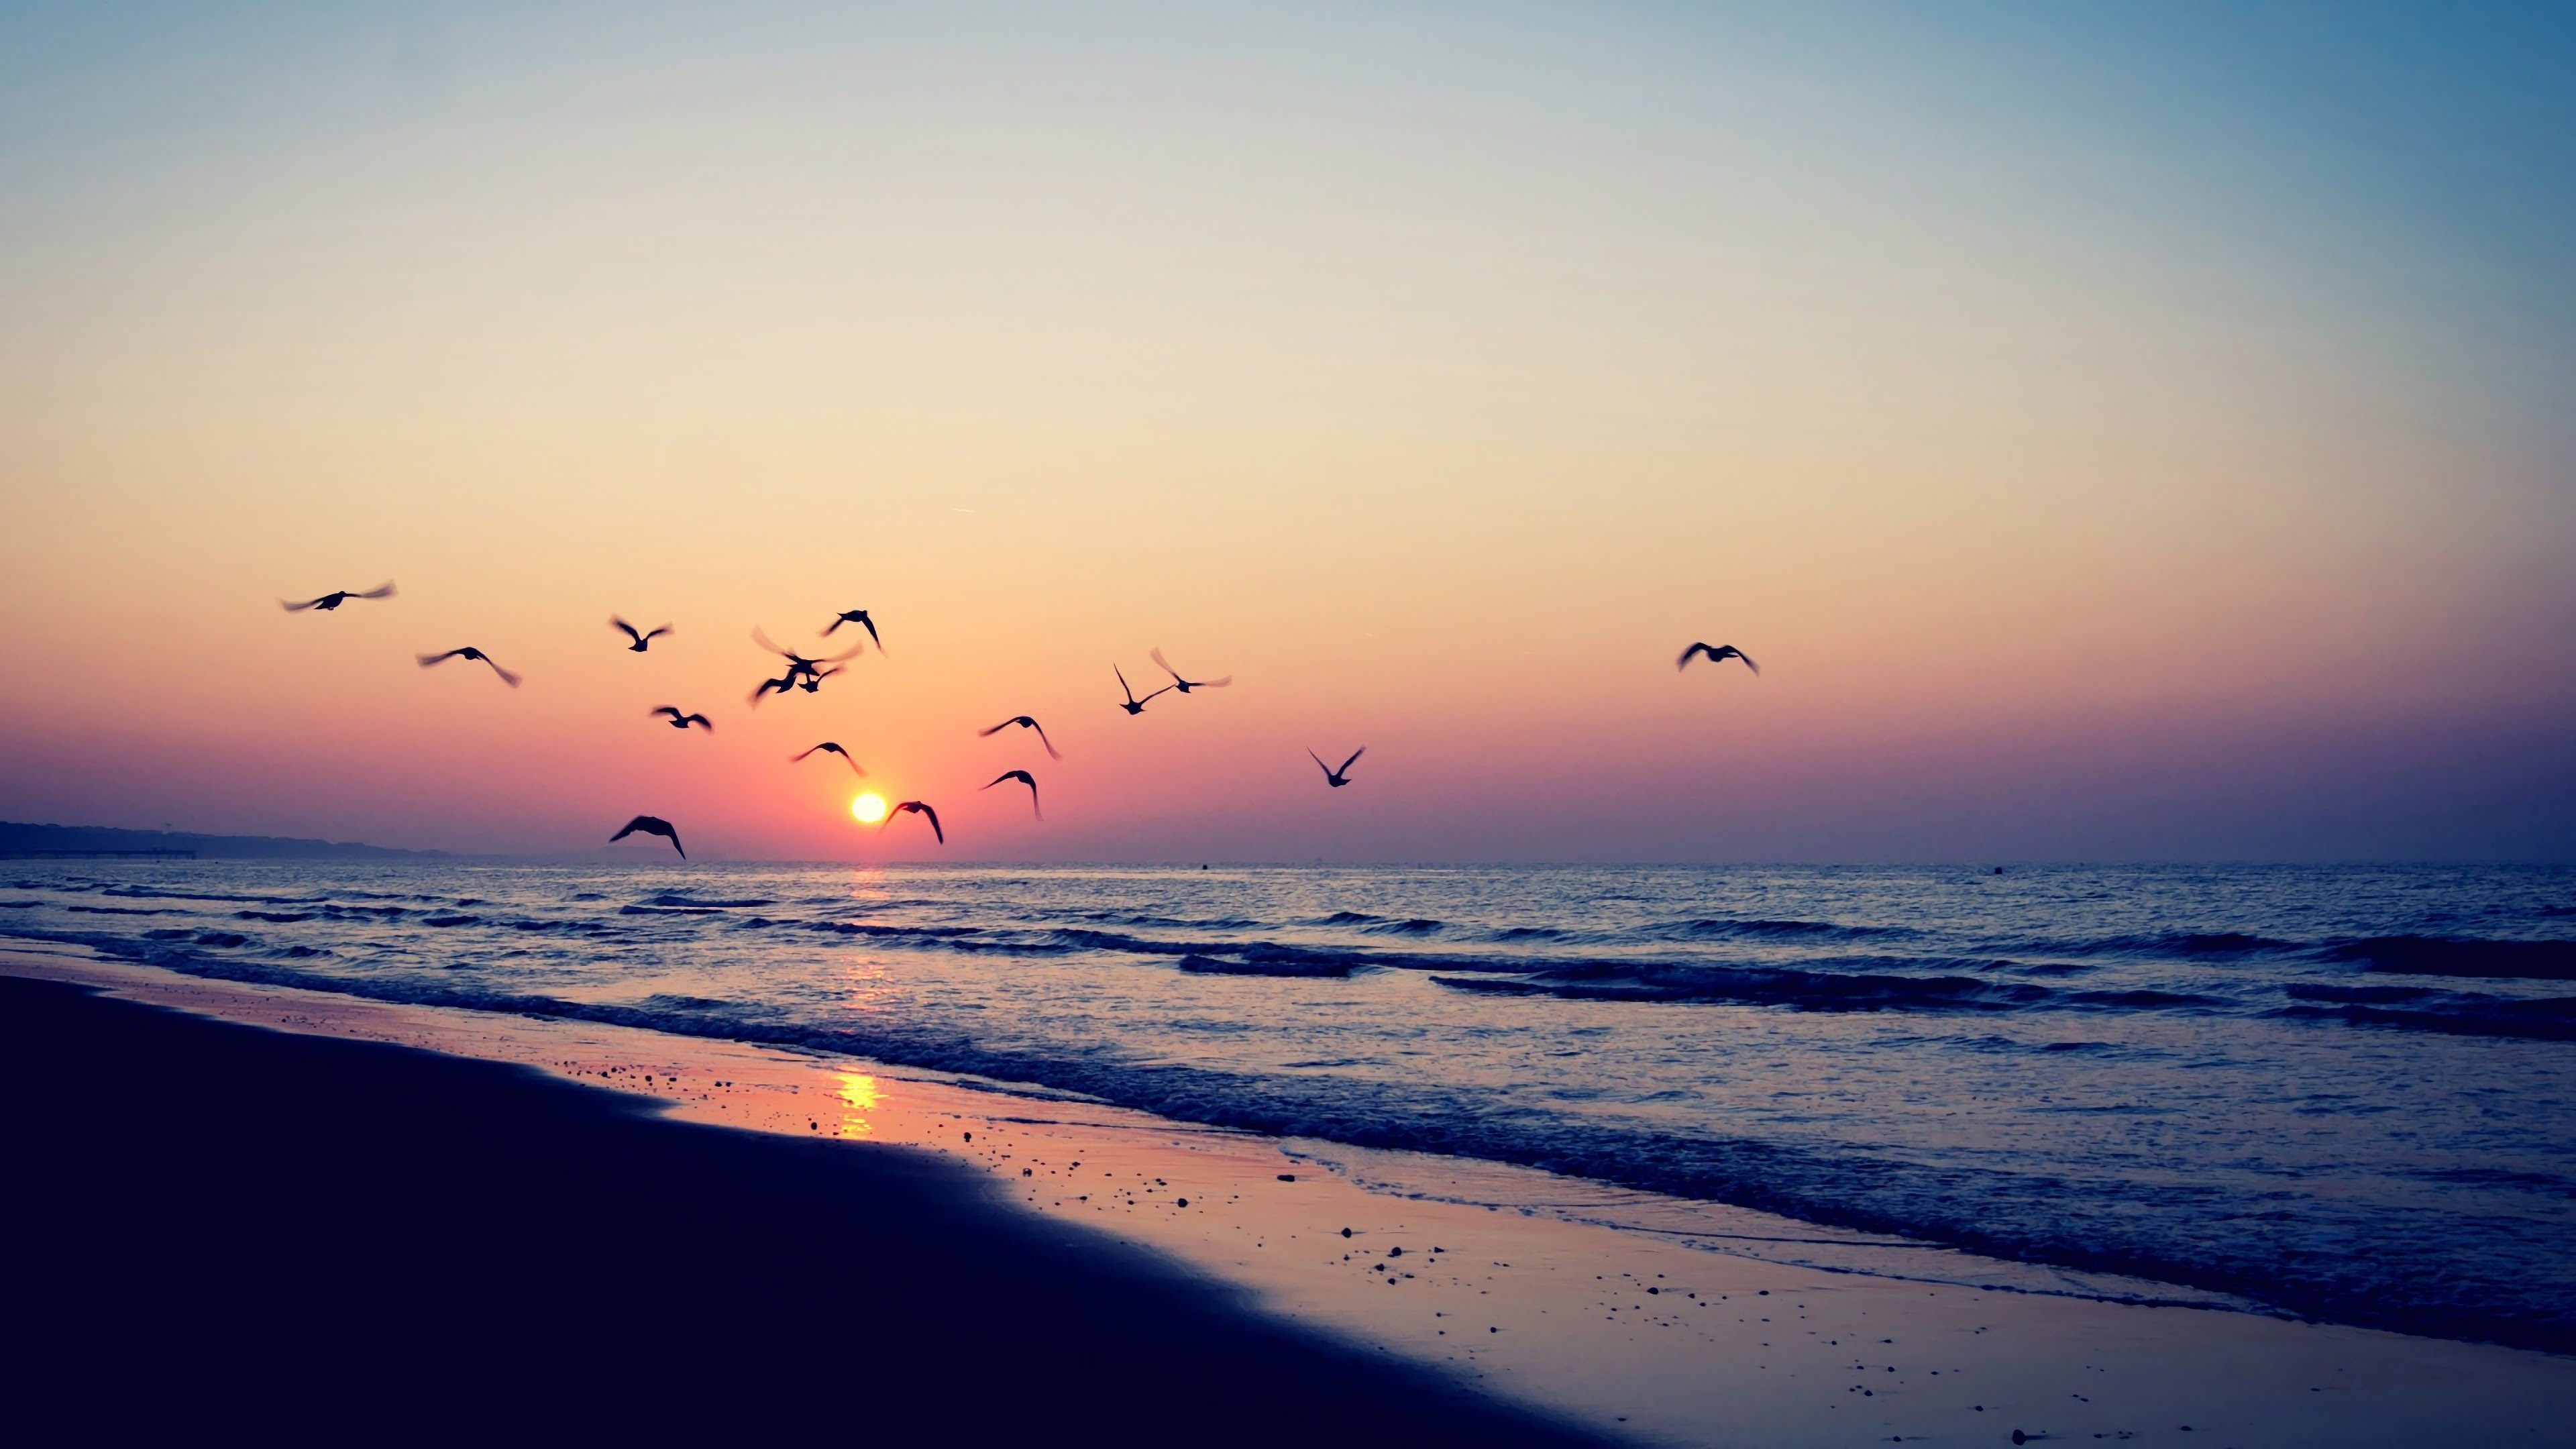 Seascape: Seagulls flying at the ocean beach at the sunset, Magnificent evening view. 3840x2160 4K Background.